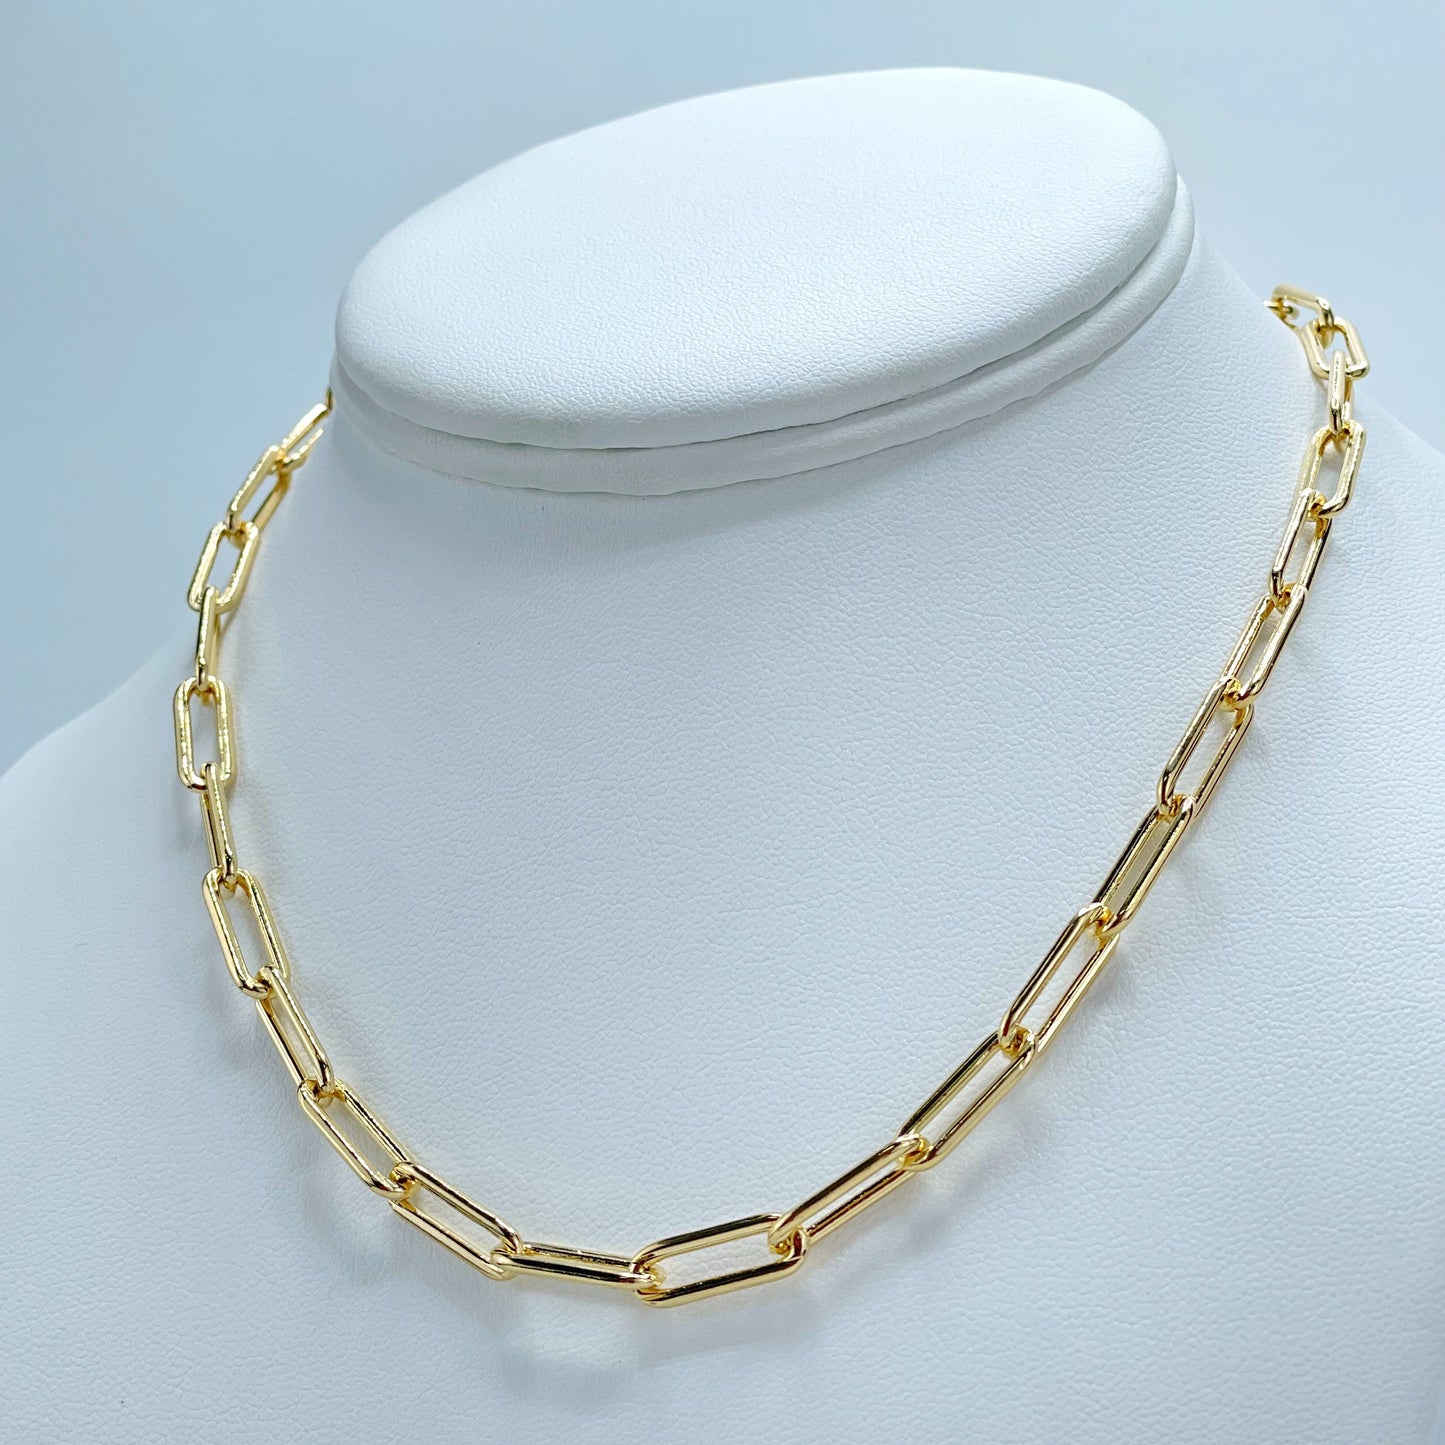 18k Gold Filled 6mm Paperclip Link Chain 16 inches Necklace Wholesale Jewelry Supplies